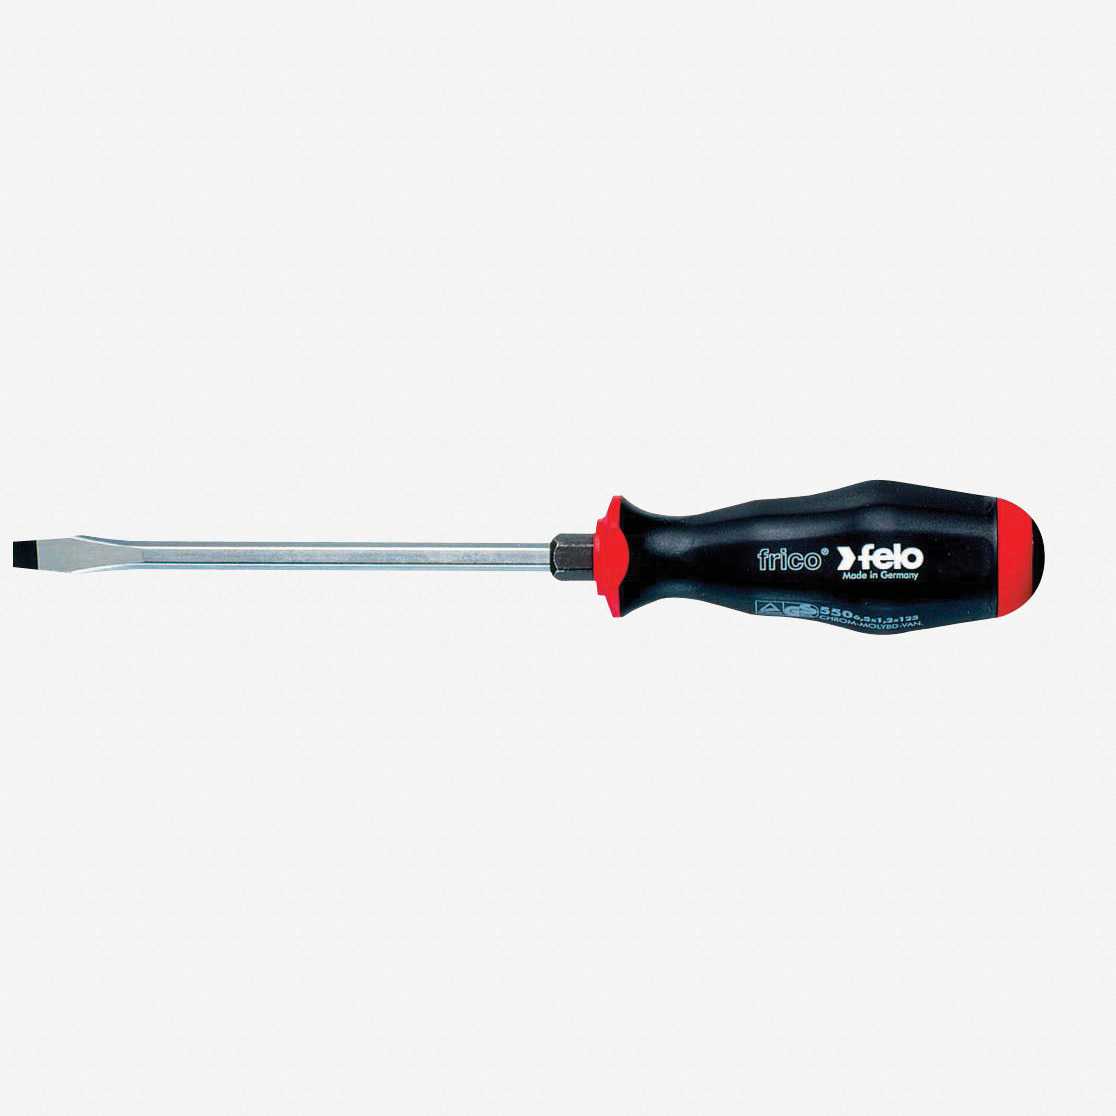 Felo 32360 3/8' x 7' Slotted Screwdriver - 2 Component Handle with Metal Cap